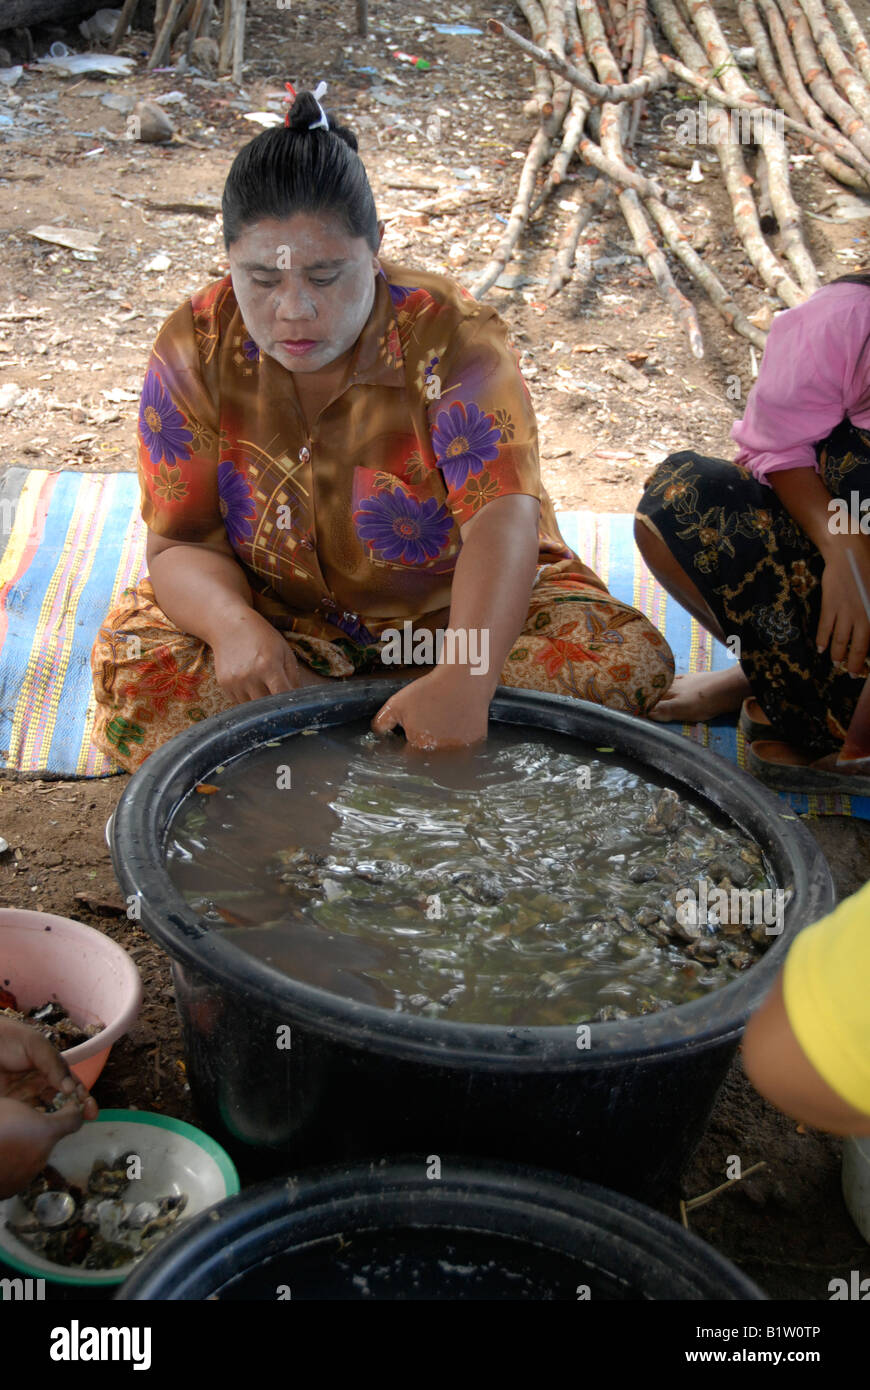 cleaning oysters at sea gypsy village phuket thailand Stock Photo